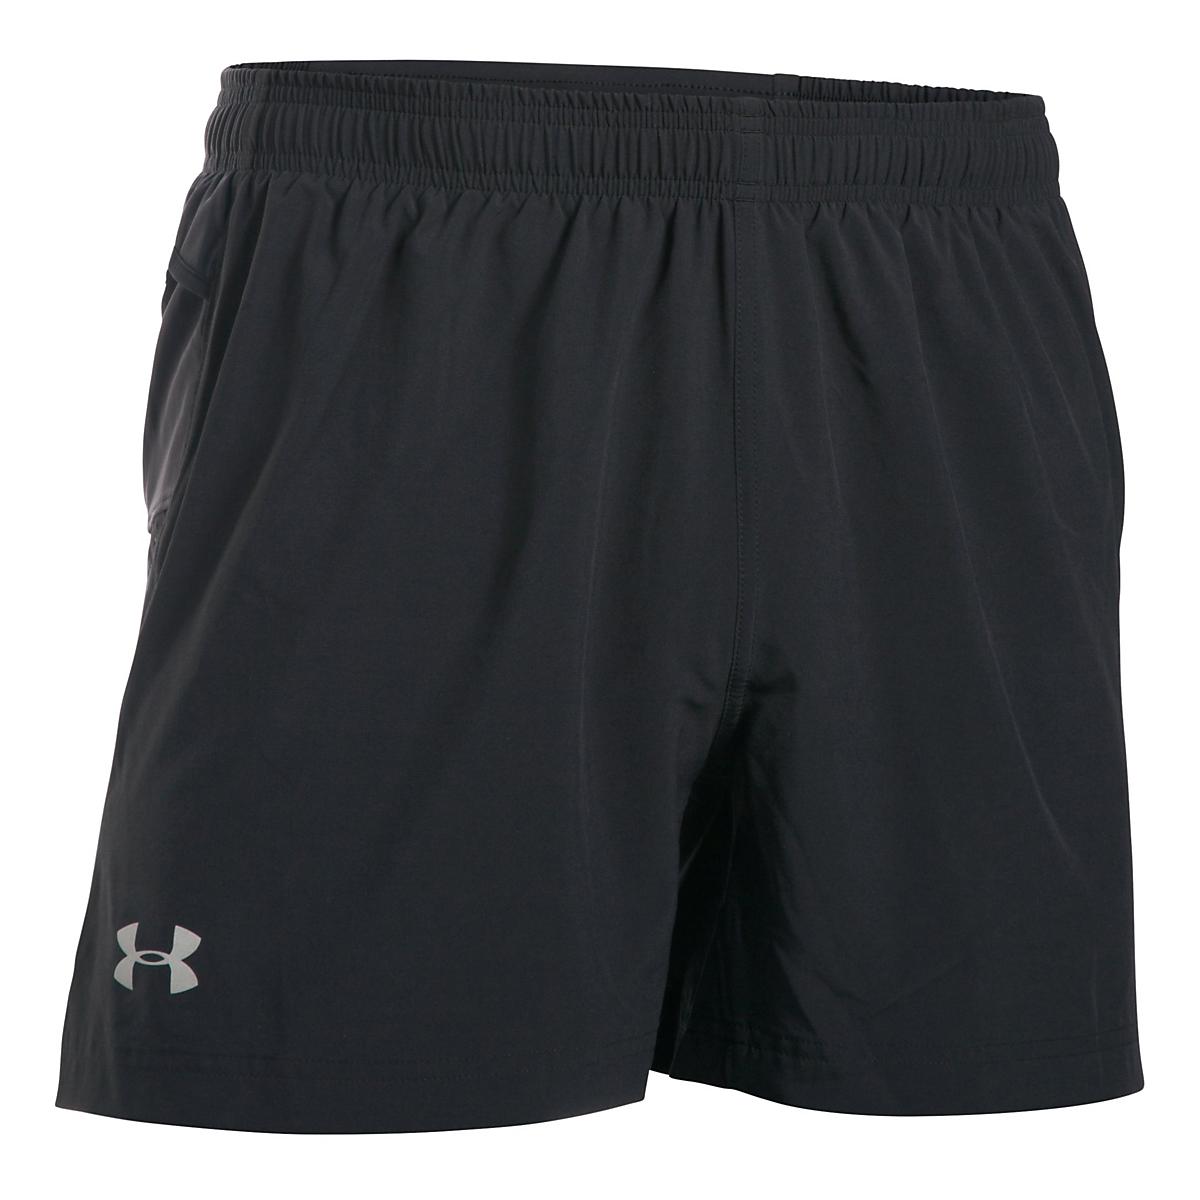 Mens Under Armour Performance 5